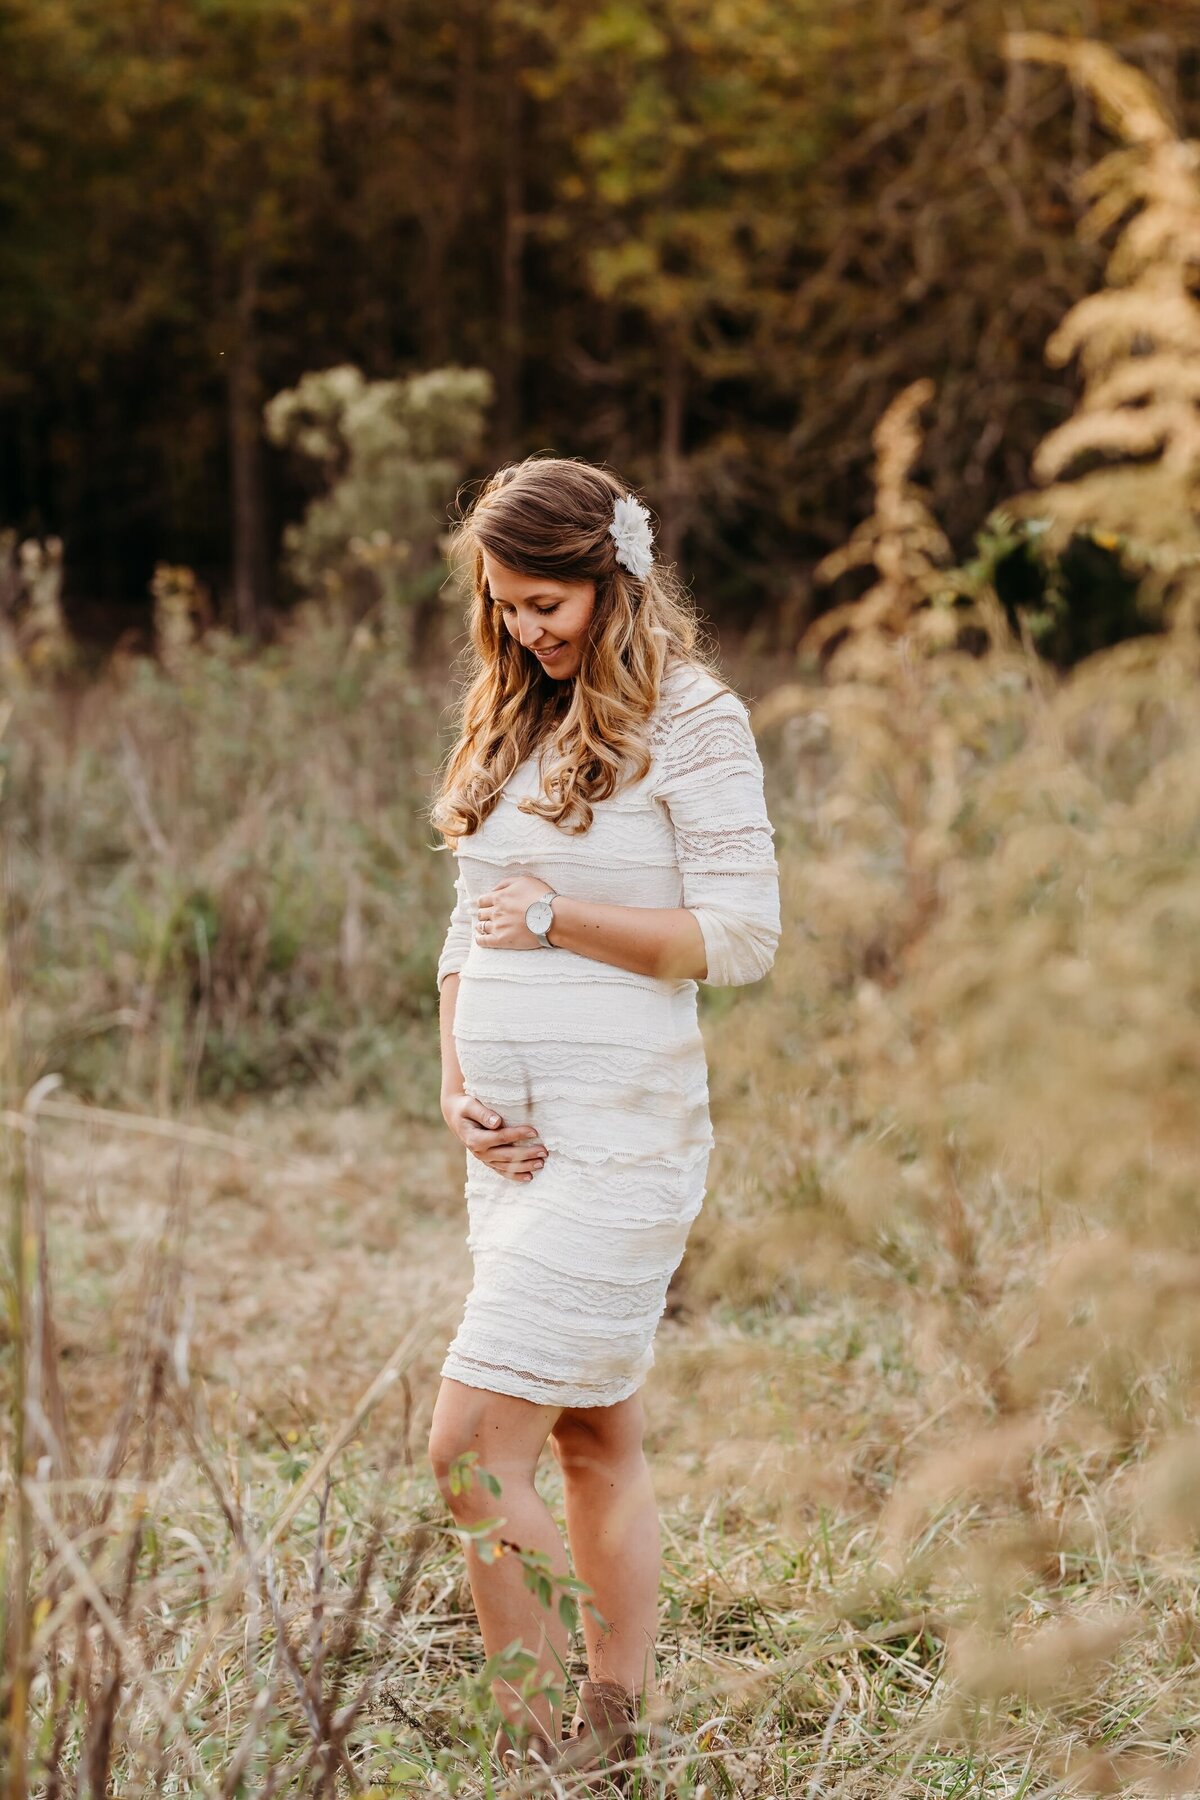 2021-11-02 - Toedt Maternity Session01